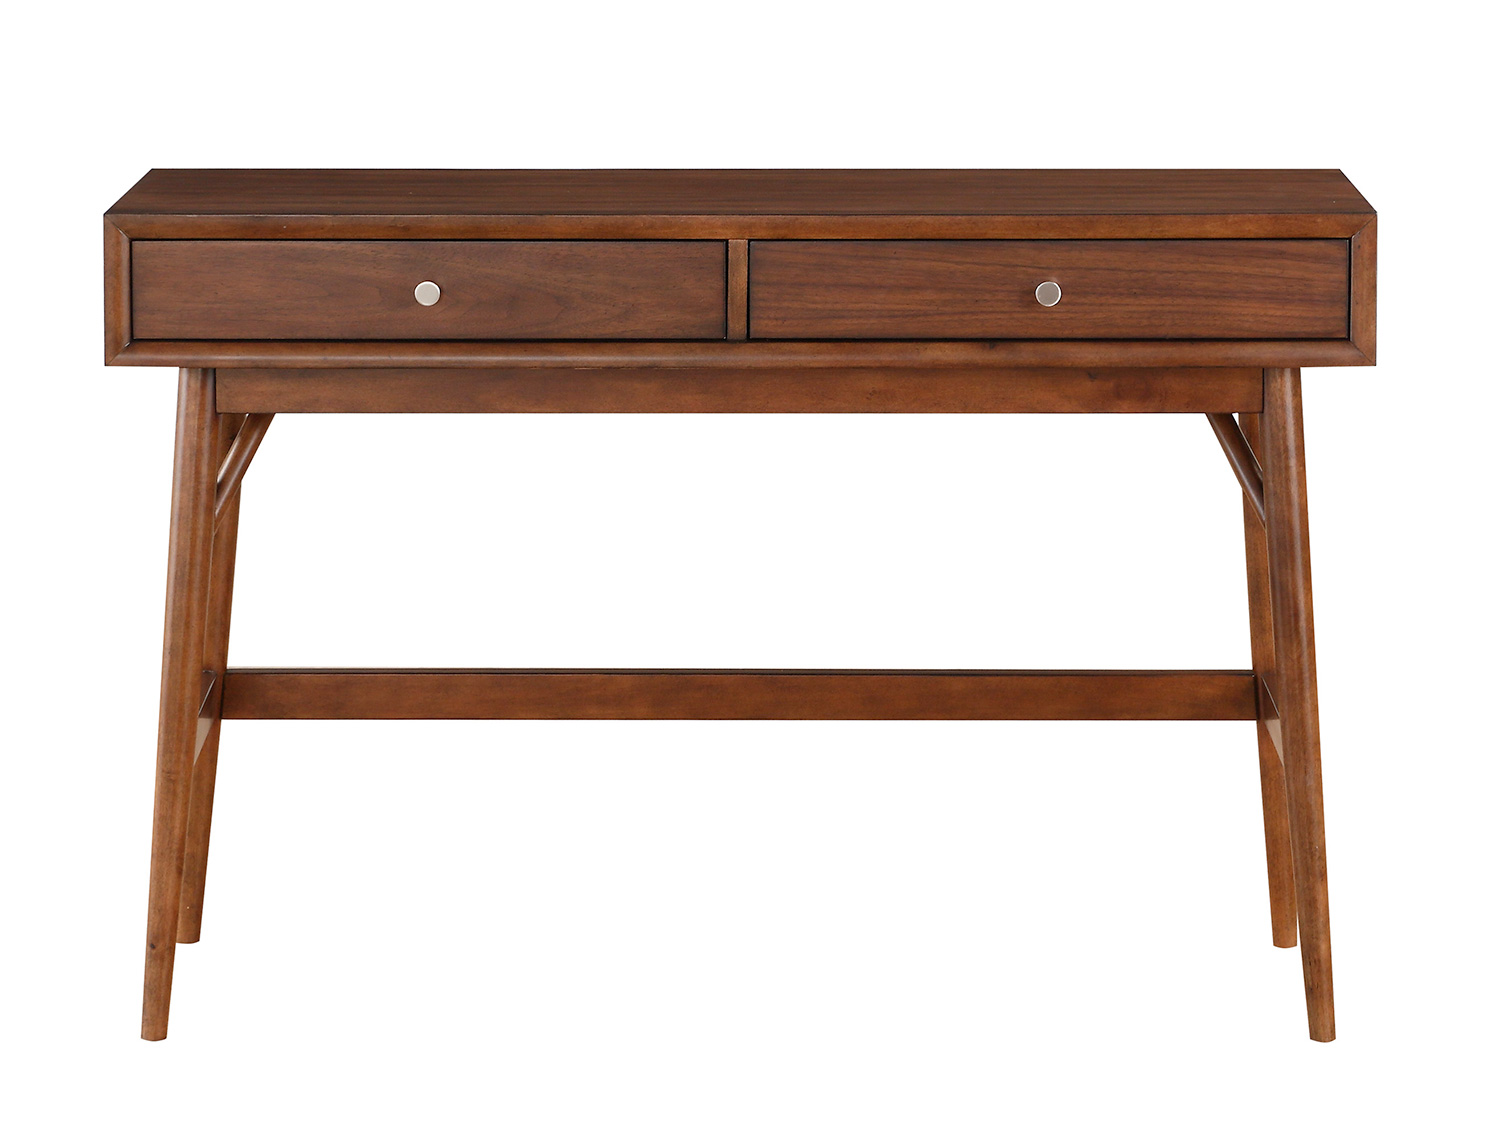 Homelegance Frolic Sofa Table with Two Functional Drawers - Brown